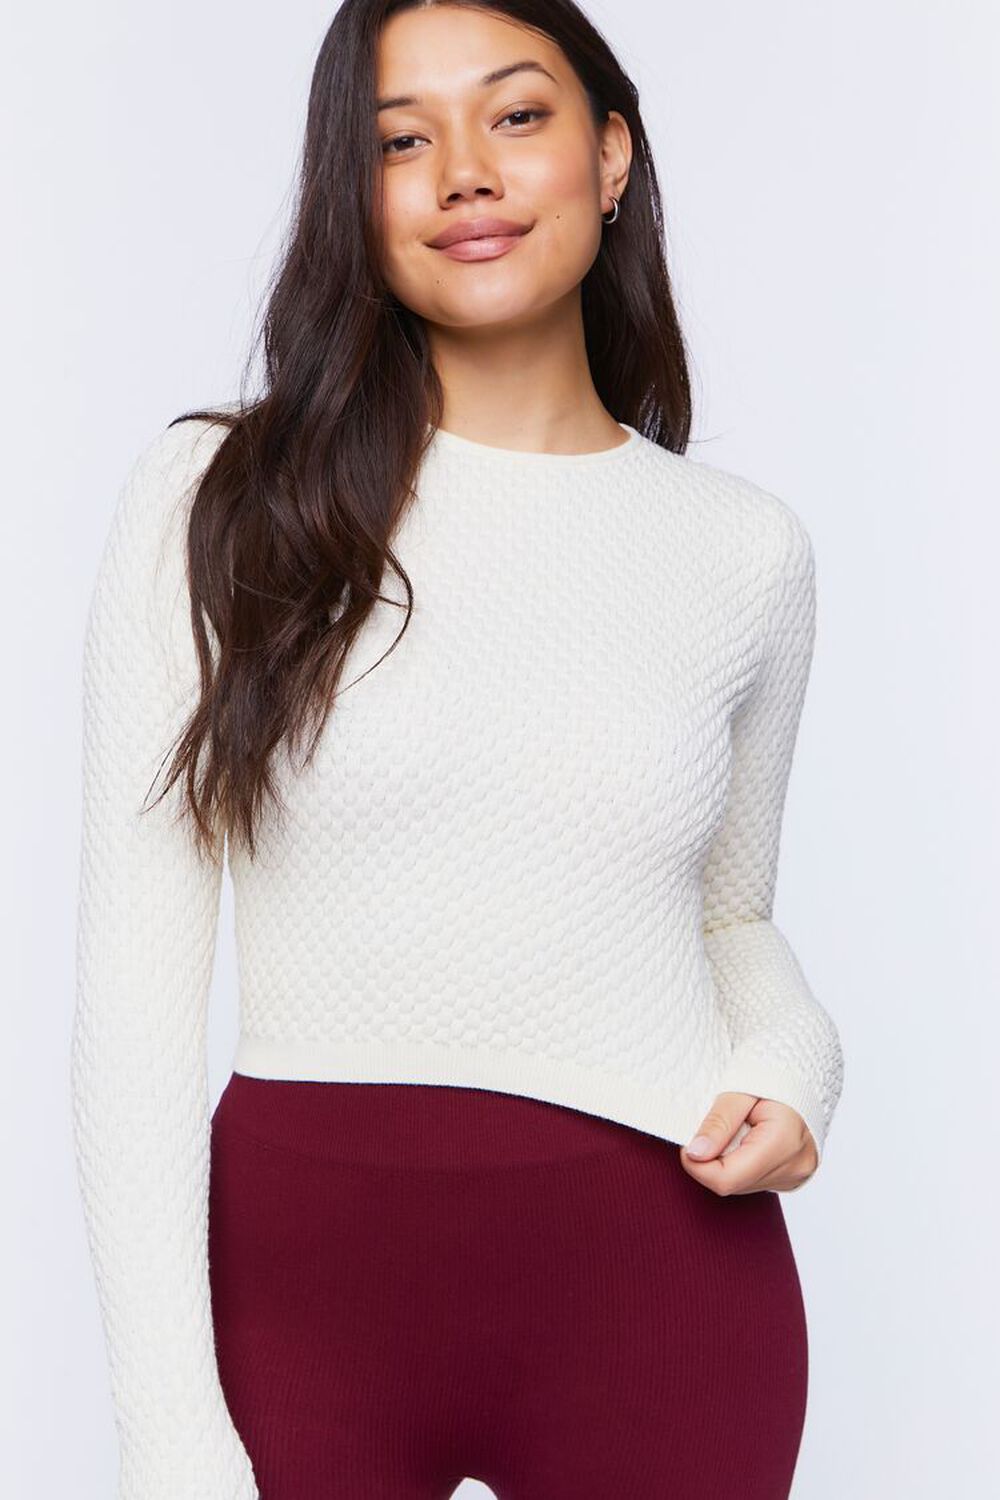 CREAM Textured Fitted Sweater, image 1